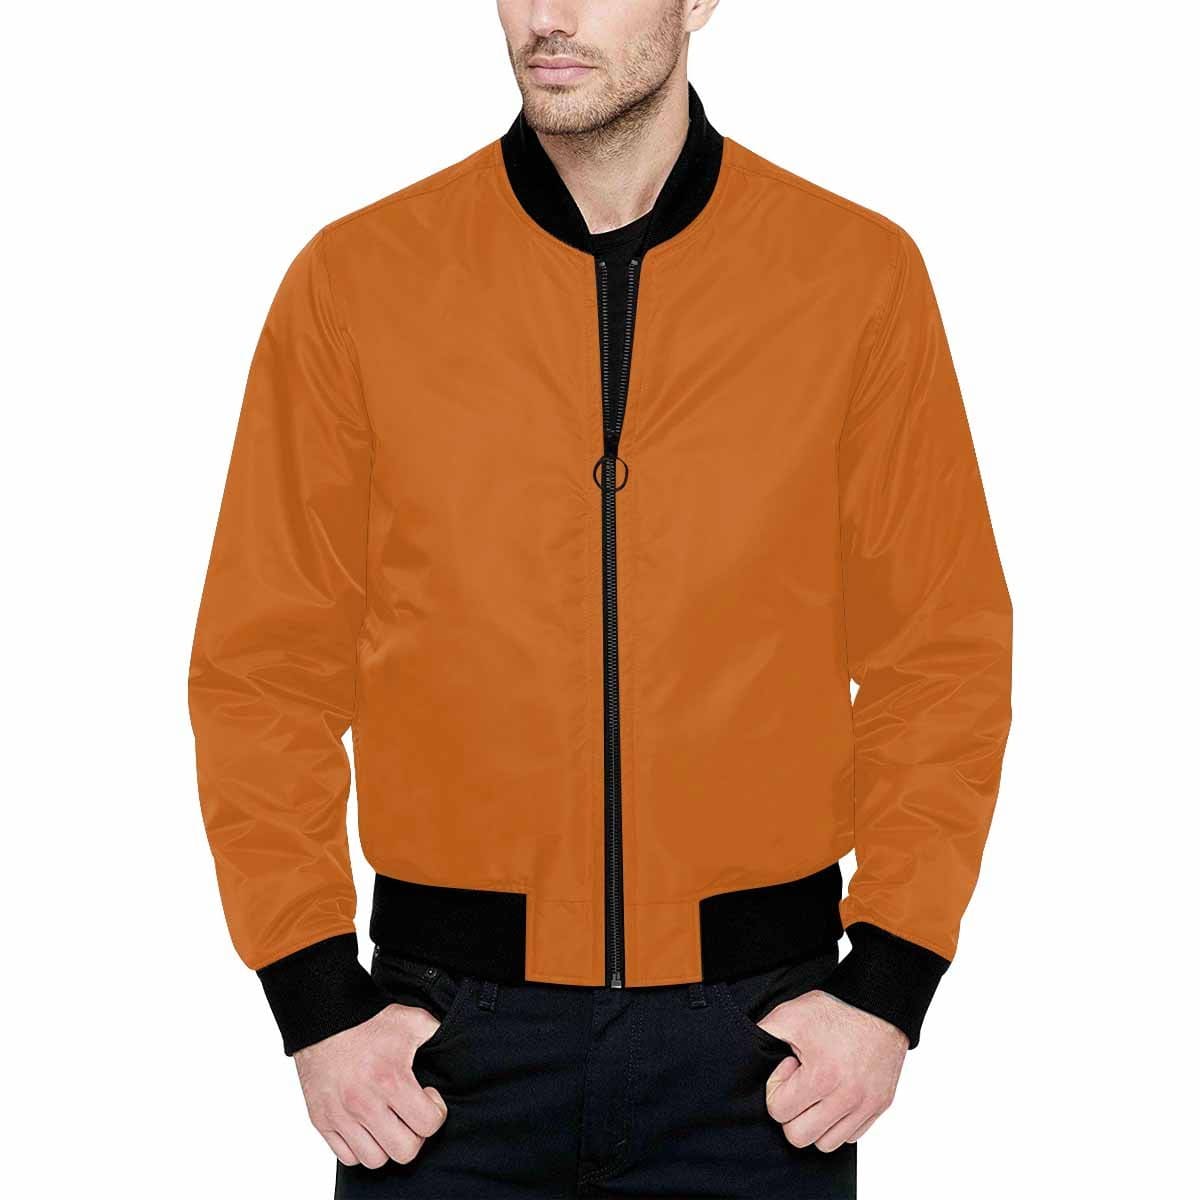 Bomber Jacket For Men Cinnamon Brown And Black - Mens | Jackets | Bombers